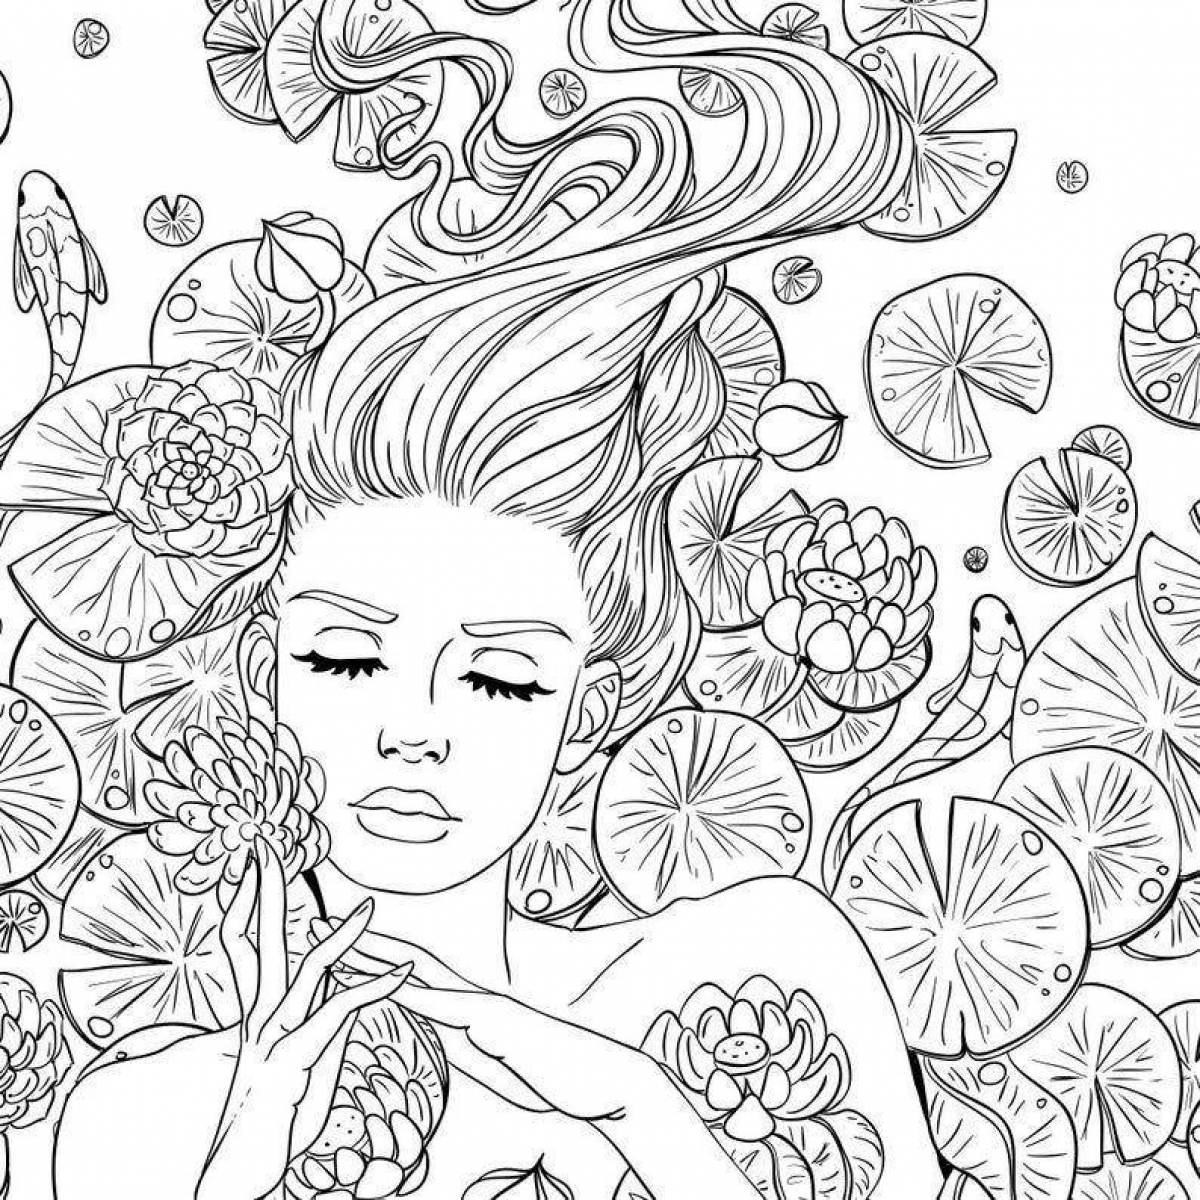 Charming coloring book for girls 12 years old aesthetics